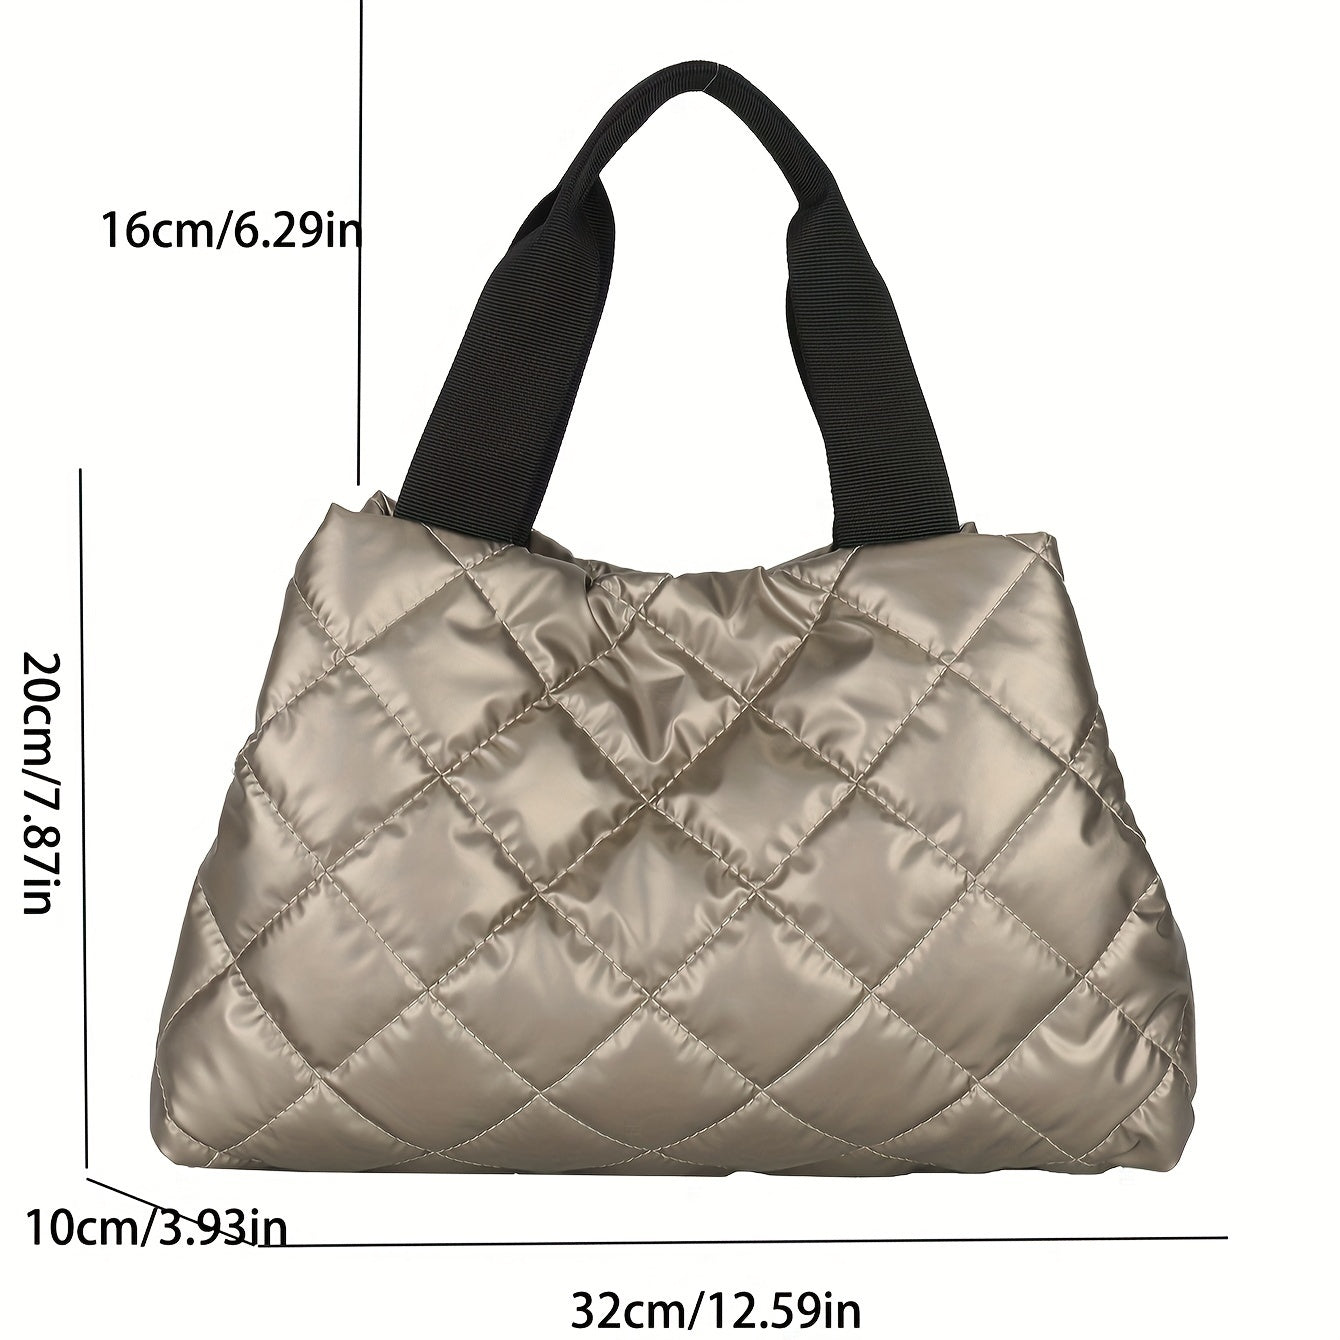 realaiot  Fashion Puffer Quilted Handbag, Fashion Soft Tote Bag, Women's Lightweight Padded Shoulder Bag